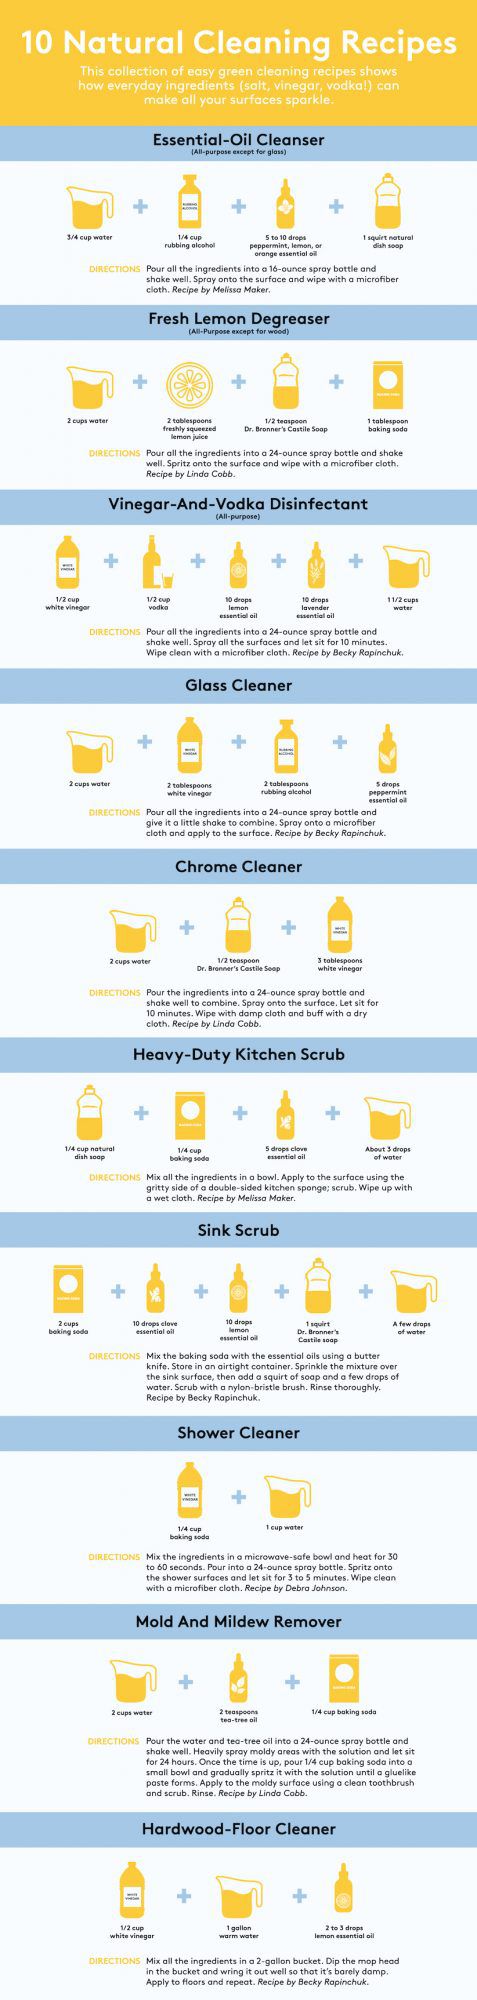 Homemade cleaners chart: How to make 10 homemade, natural cleaners or cleaning solutions (recipes and instructions)